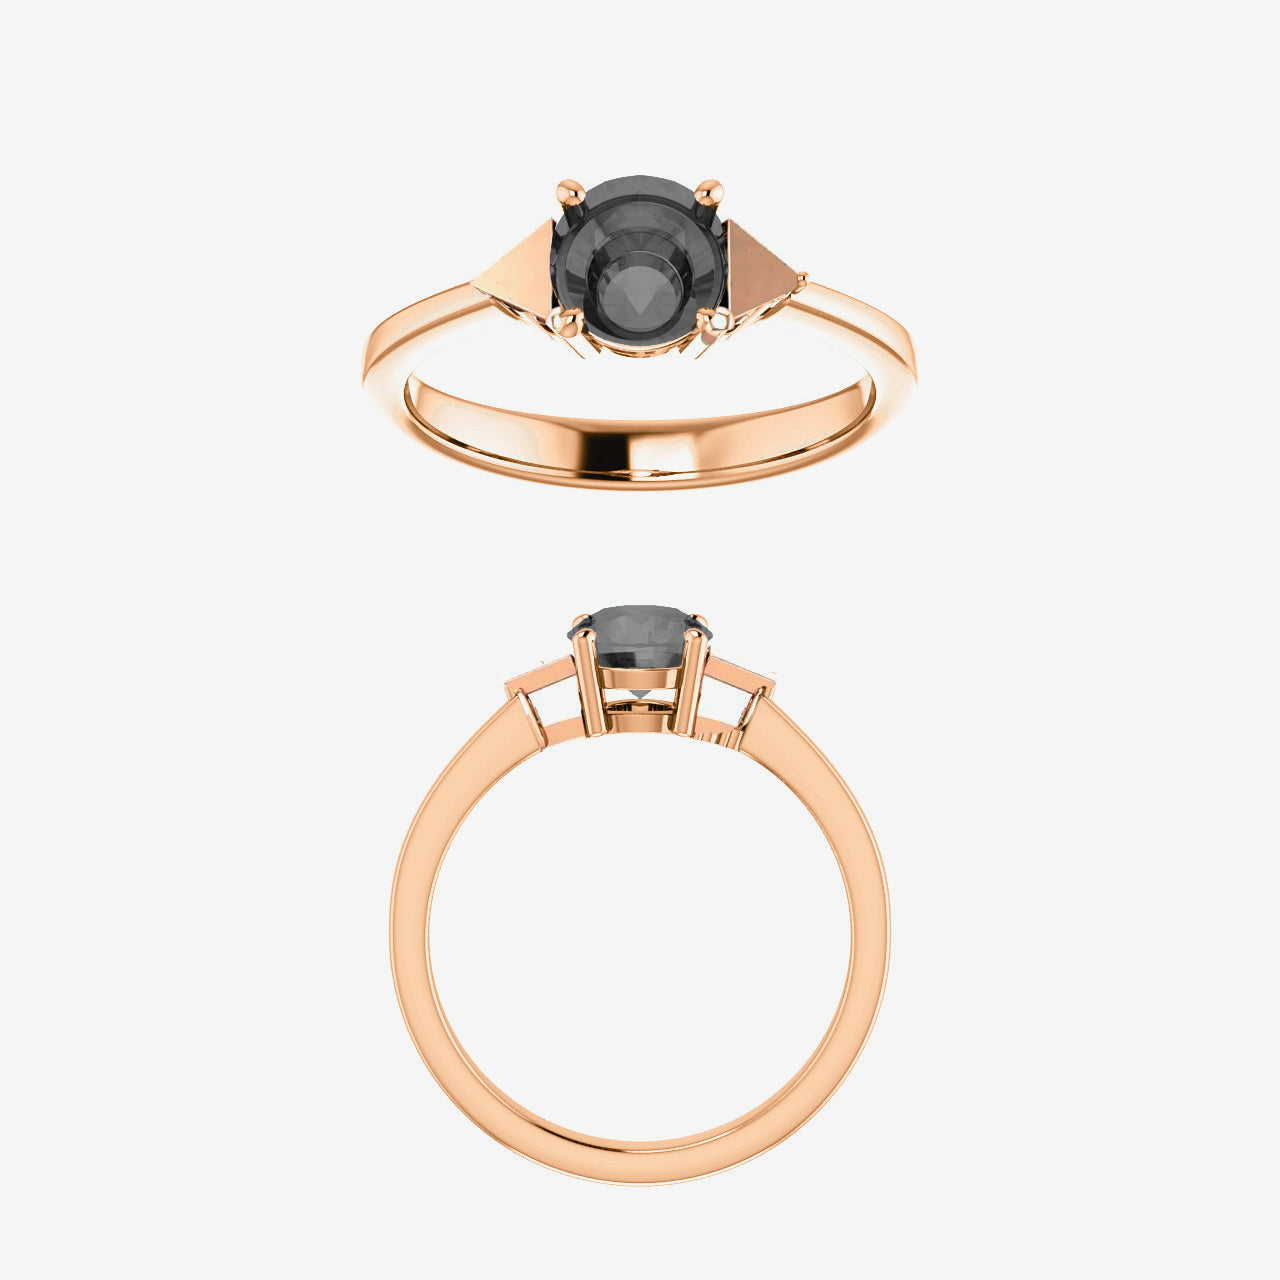 Quinta setting - Midwinter Co. Alternative Bridal Rings and Modern Fine Jewelry